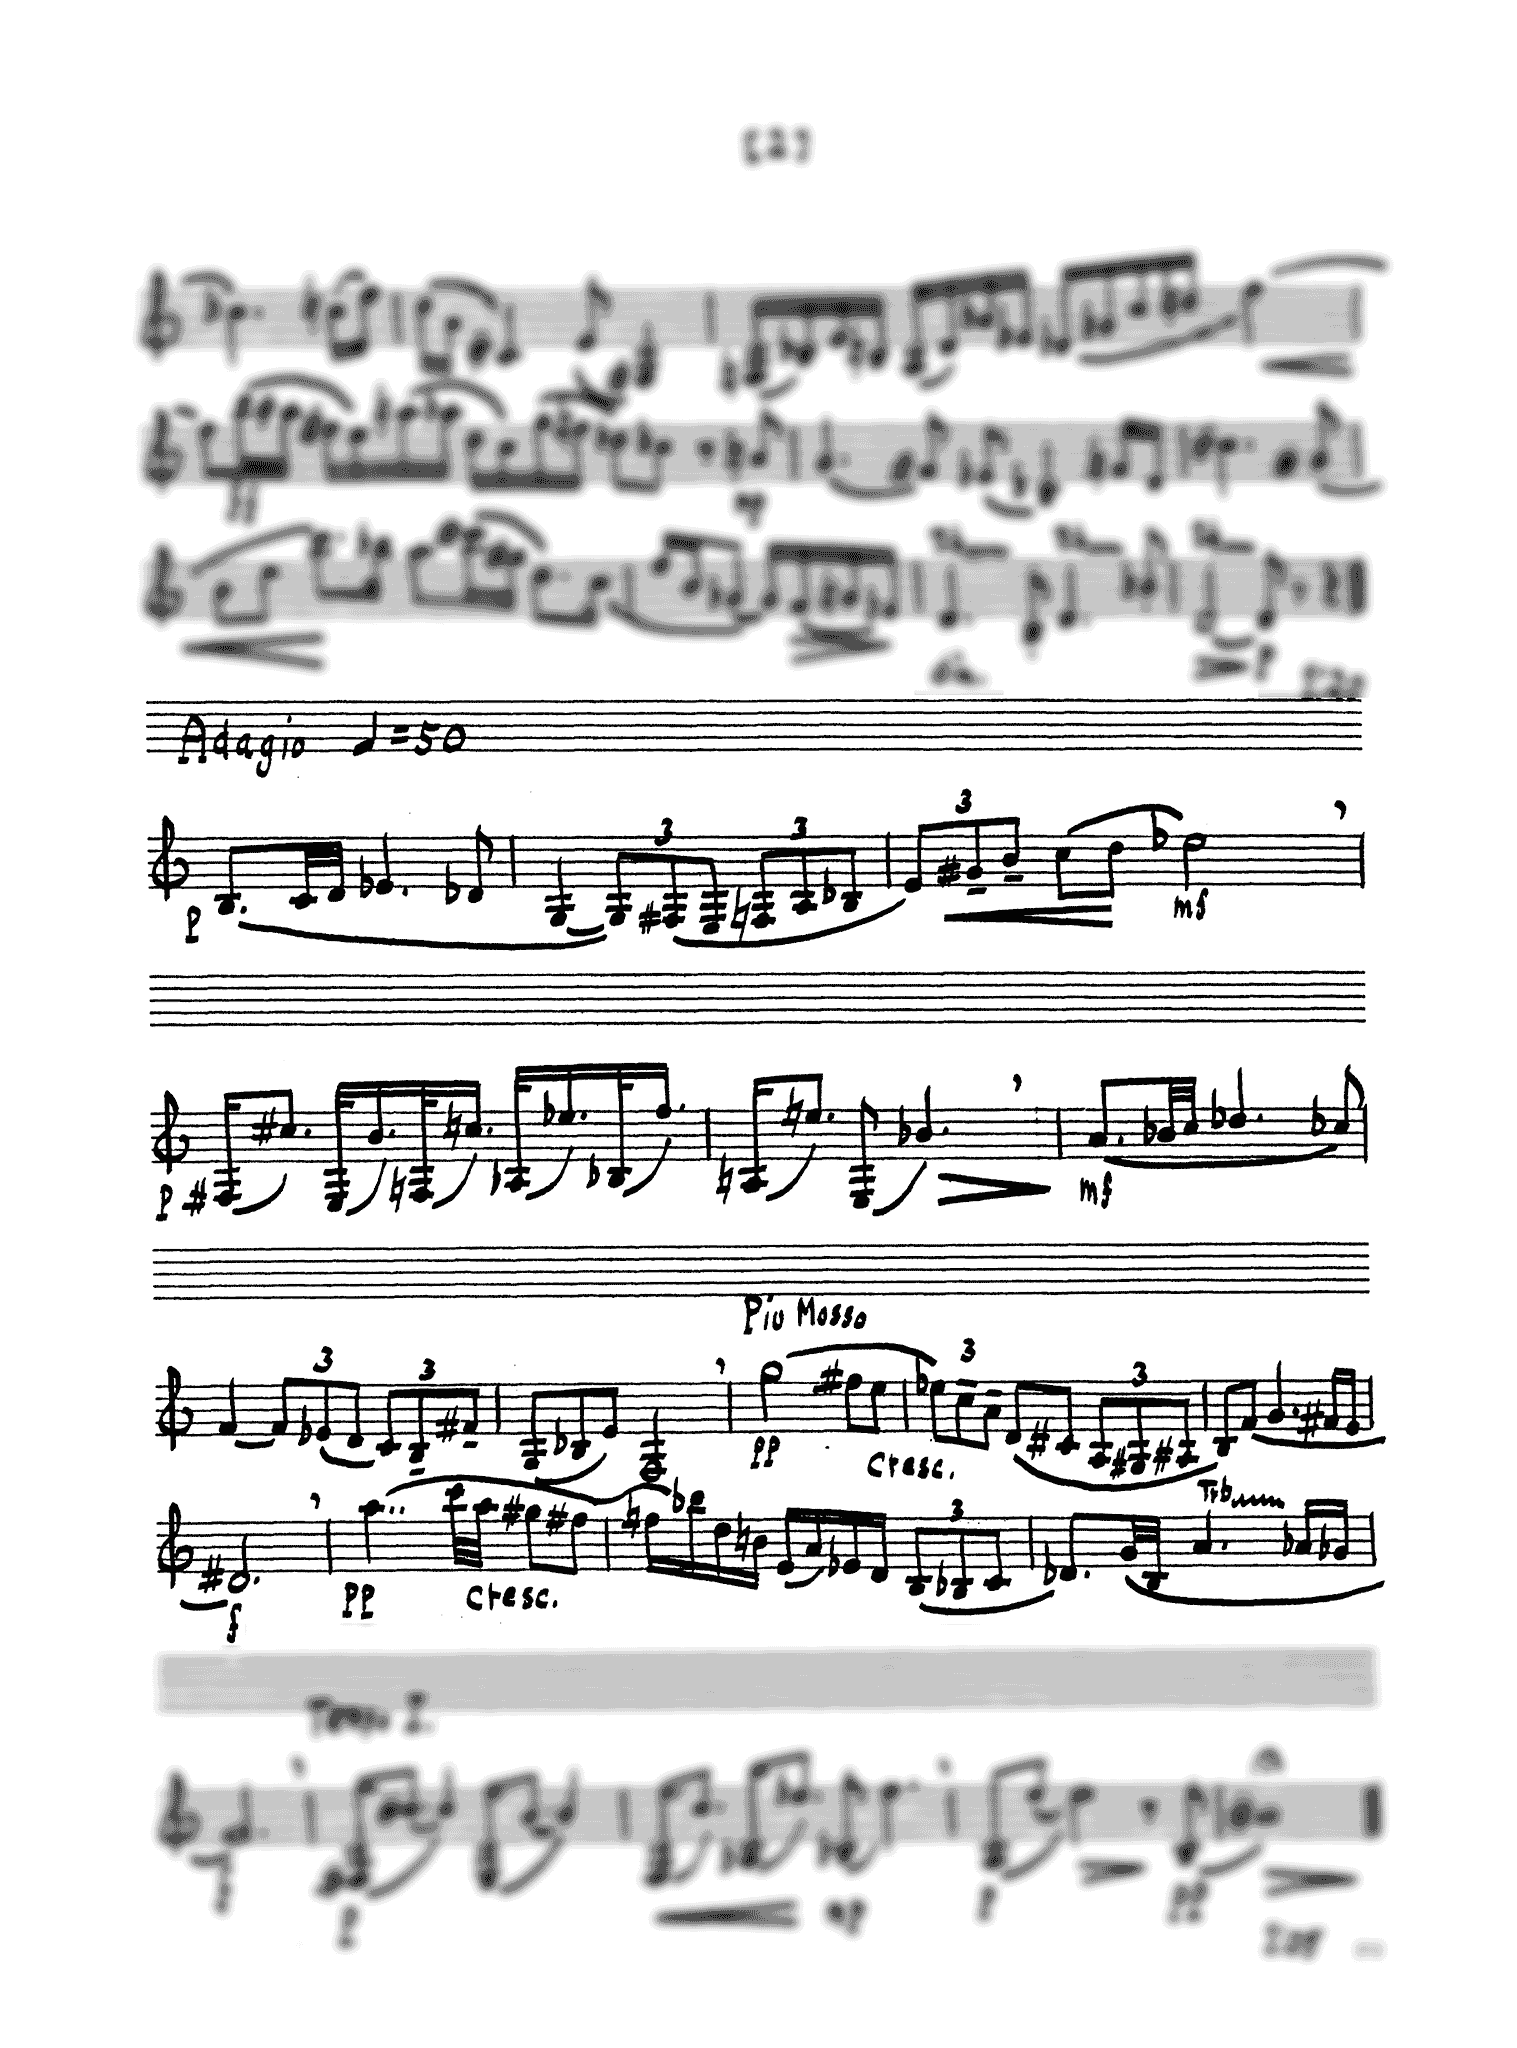 Kibbe Three Pieces for Solo Clarinet - Movement 2